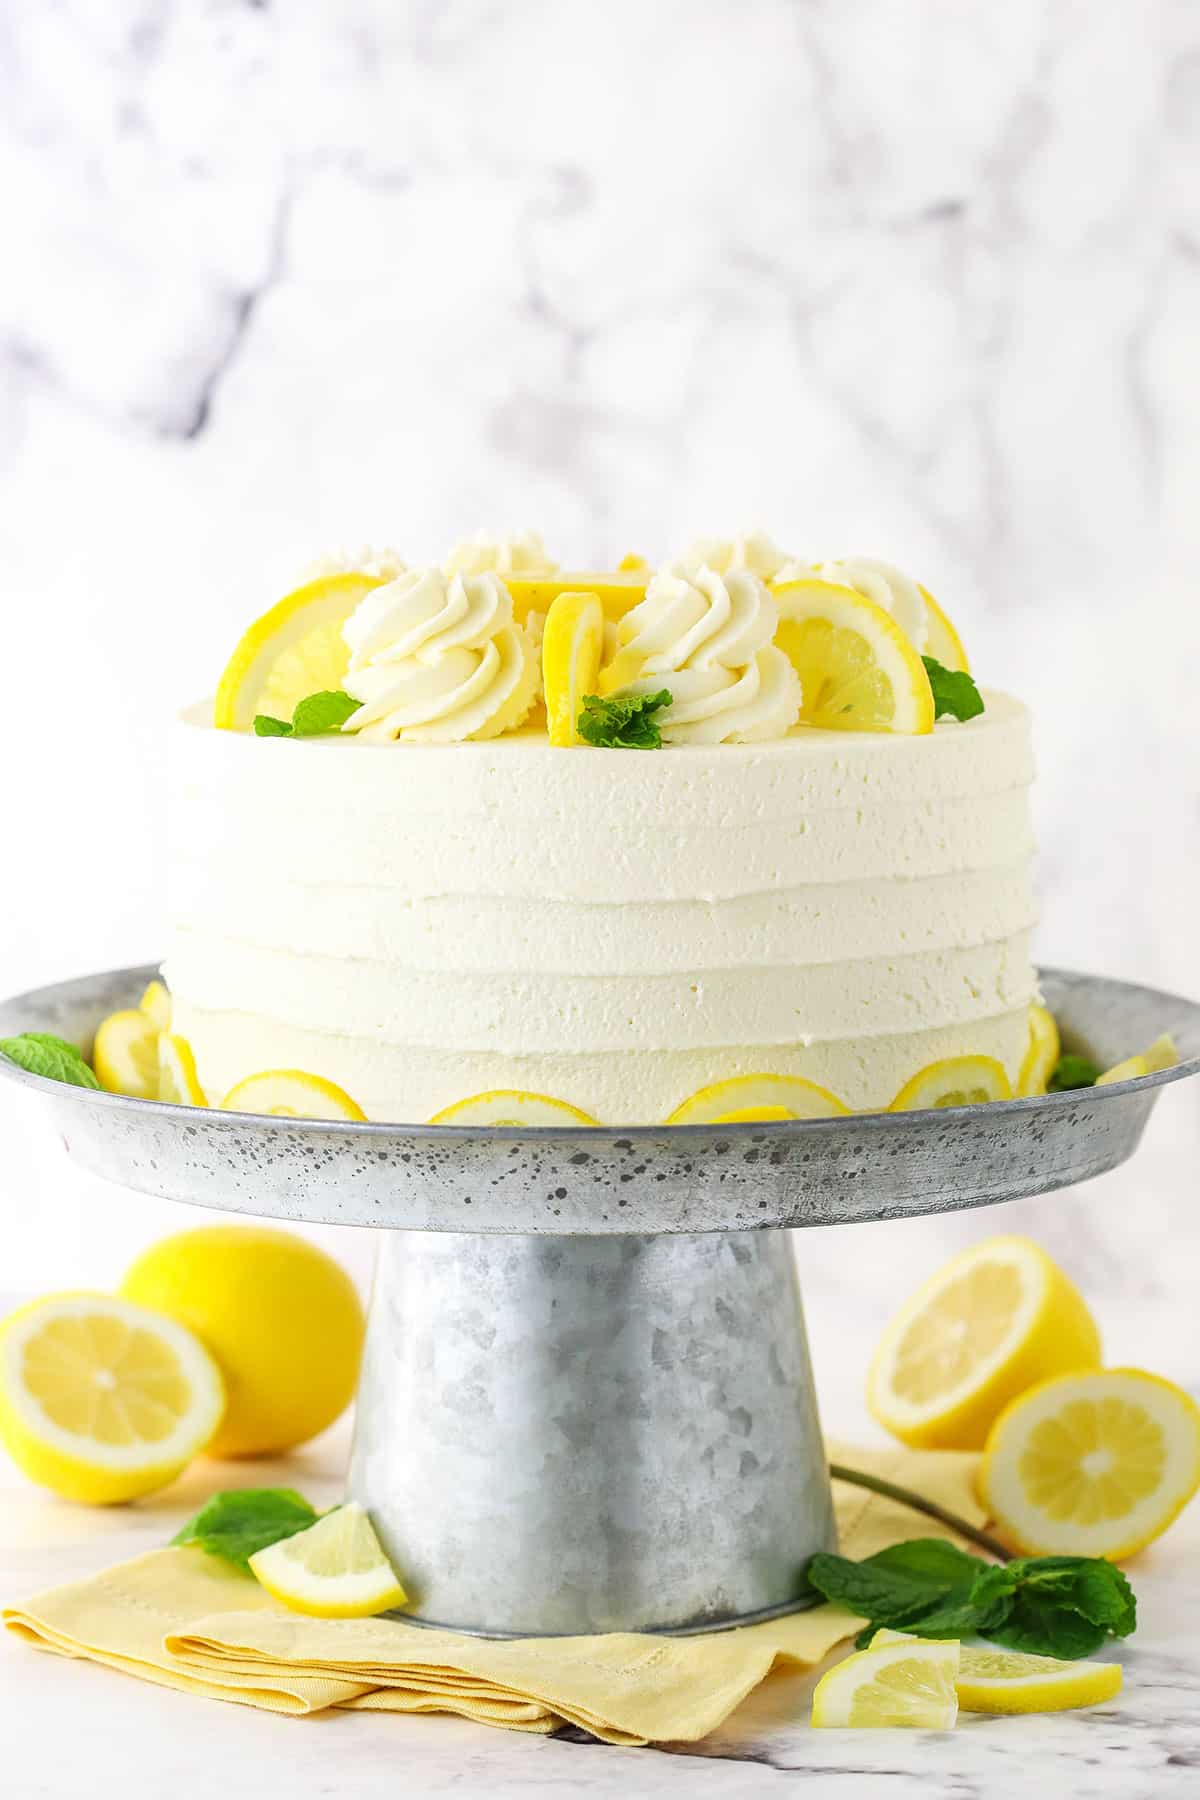 Side view of a full Lemon Mascarpone Layer Cake topped with white swirls and cut lemons on a metal colored cake stand